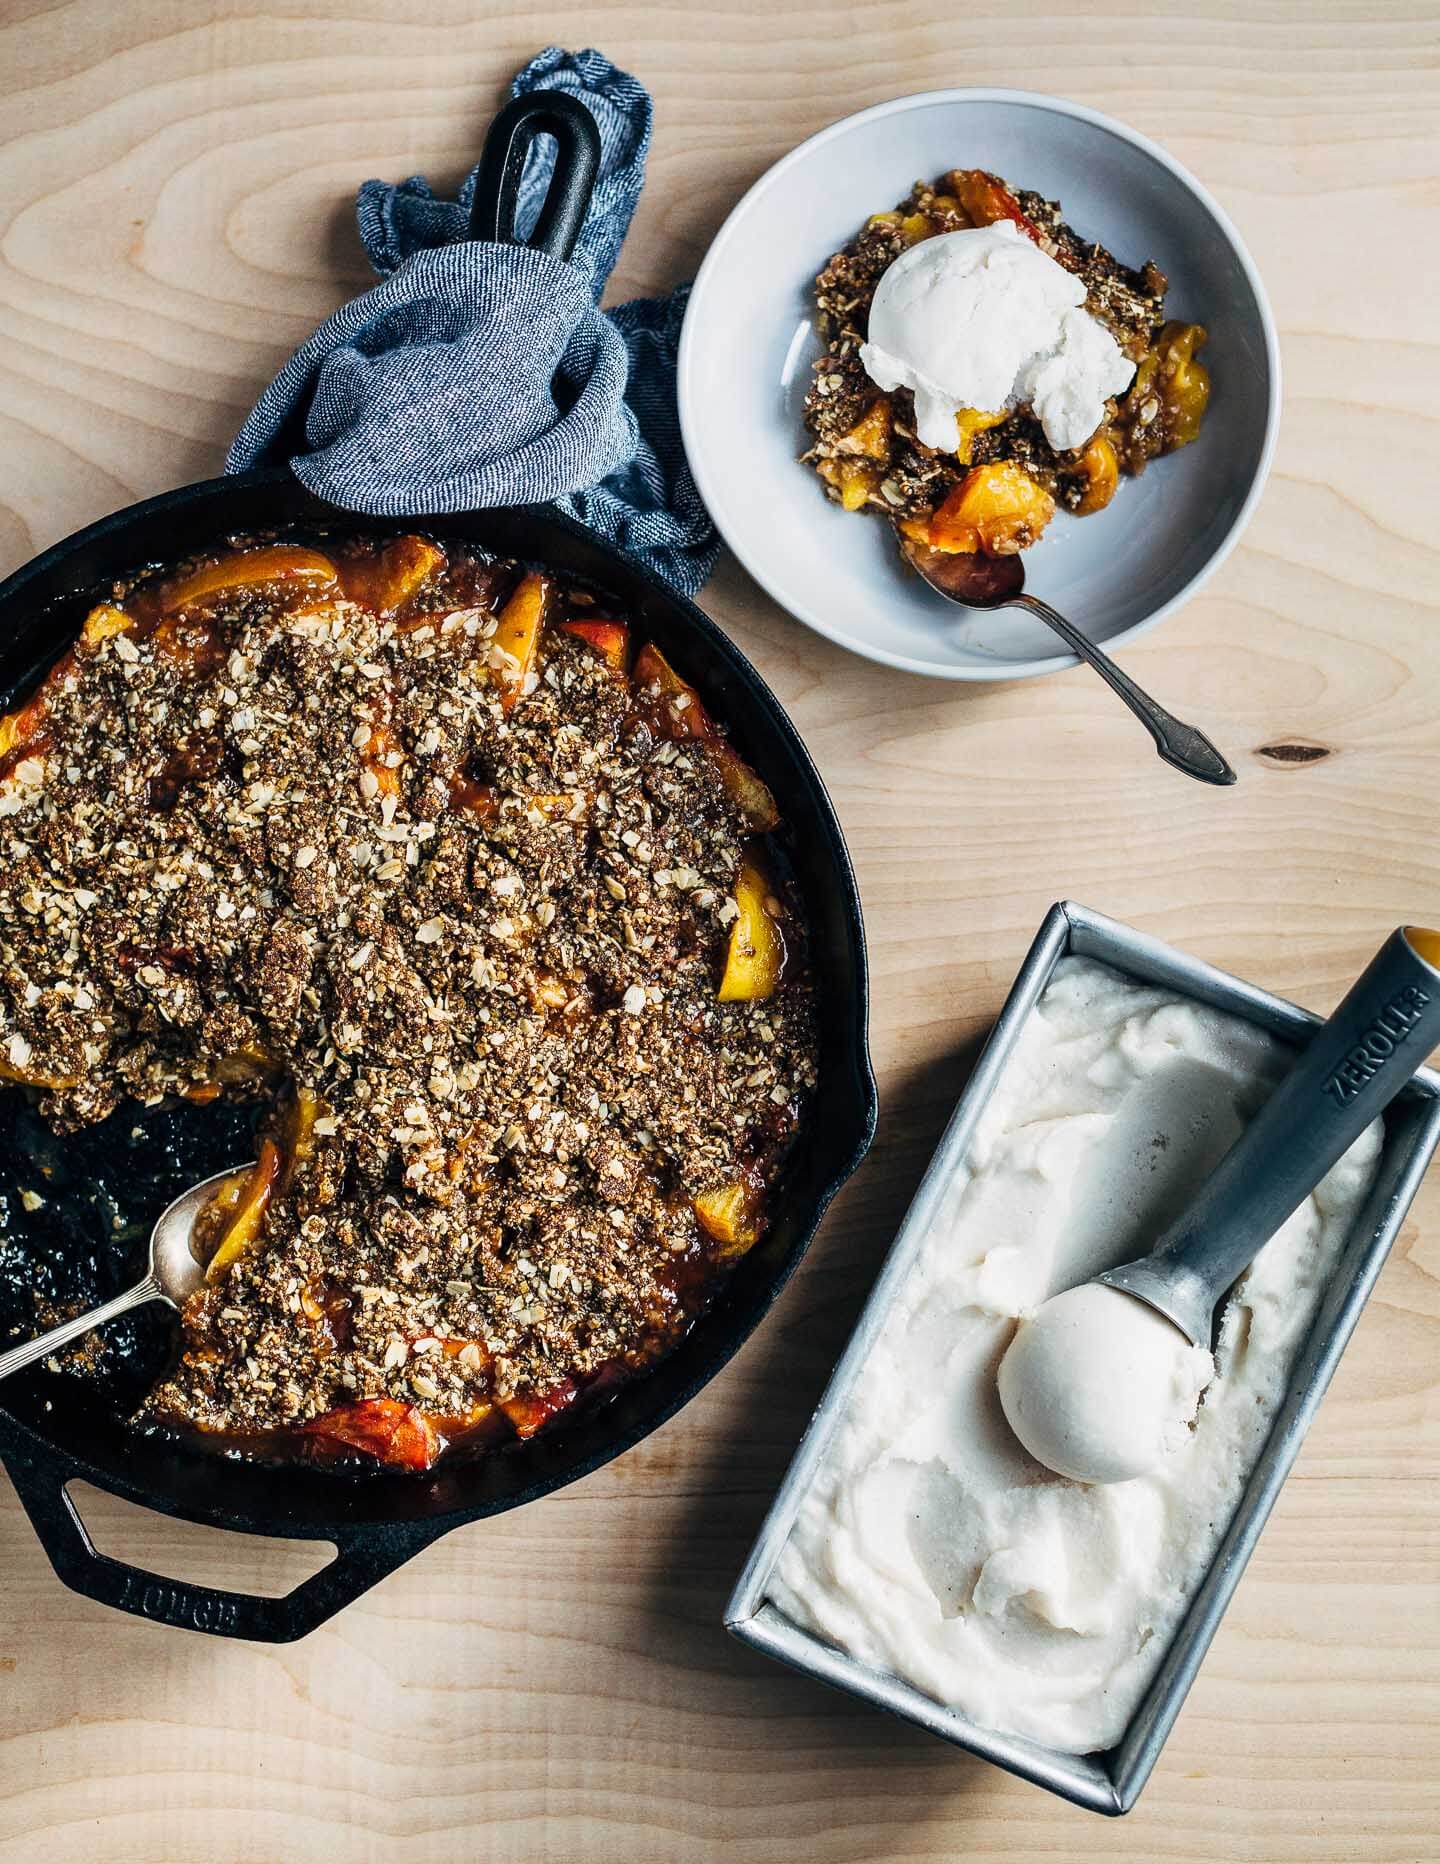 This intensely flavorful gluten-free, vegan peach crumble with masala chai-spiced coconut sorbet is the perfect summer baking project. Big flavors like cardamom, ginger, and cinnamon lend zip to creamy homemade coconut sorbet – an ideal counterpoint to chewy, molasses-infused seed and oat crumbles and bright peaches baked with a host of fragrant spices.